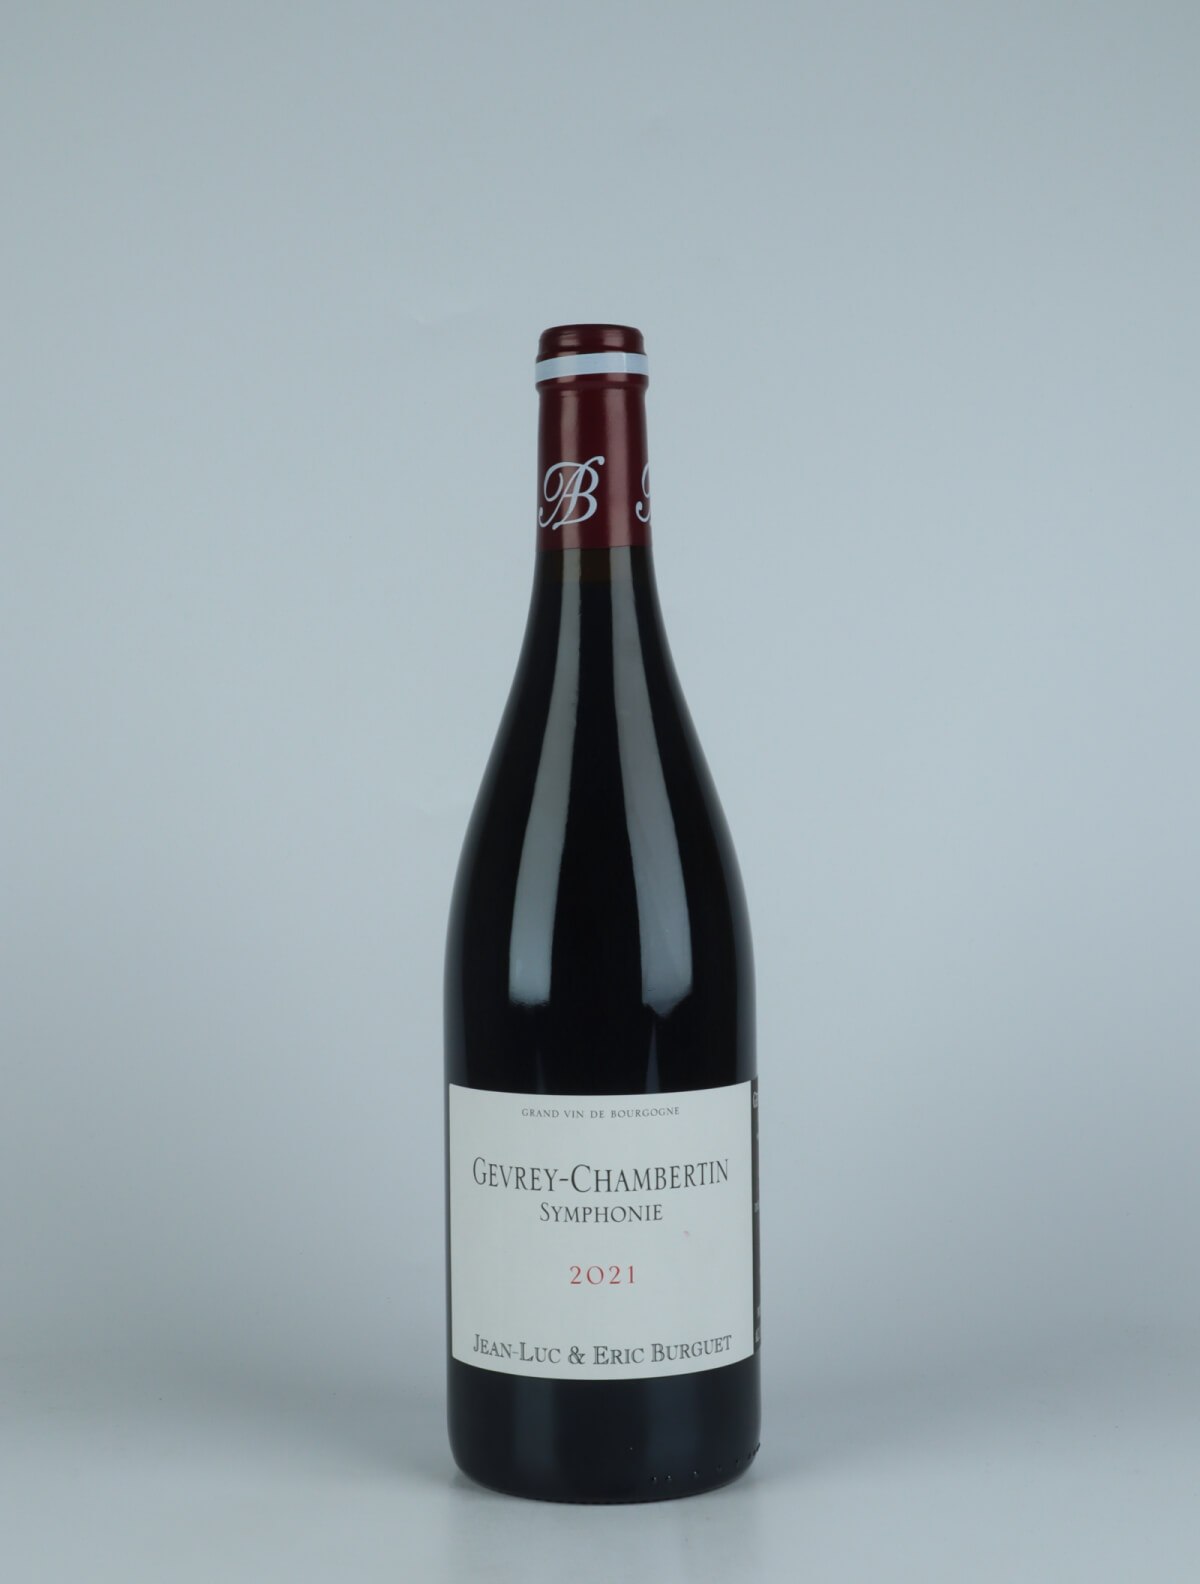 A bottle 2021 Gevrey-Chambertin - Symphonie Red wine from Jean-Luc & Eric Burguet, Burgundy in France